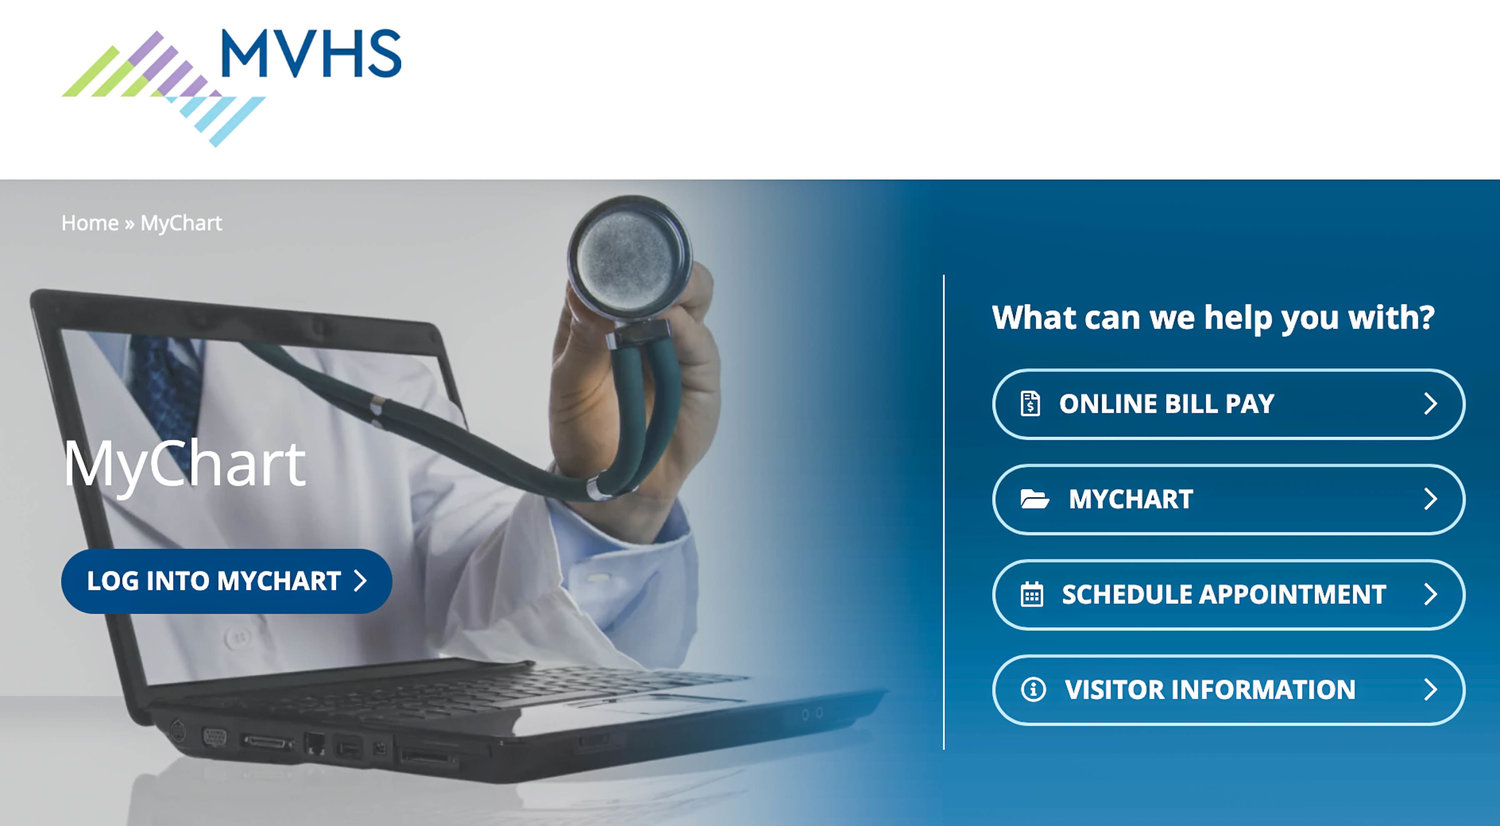 The new logo is shown on Mohawk Valley Health System's website.